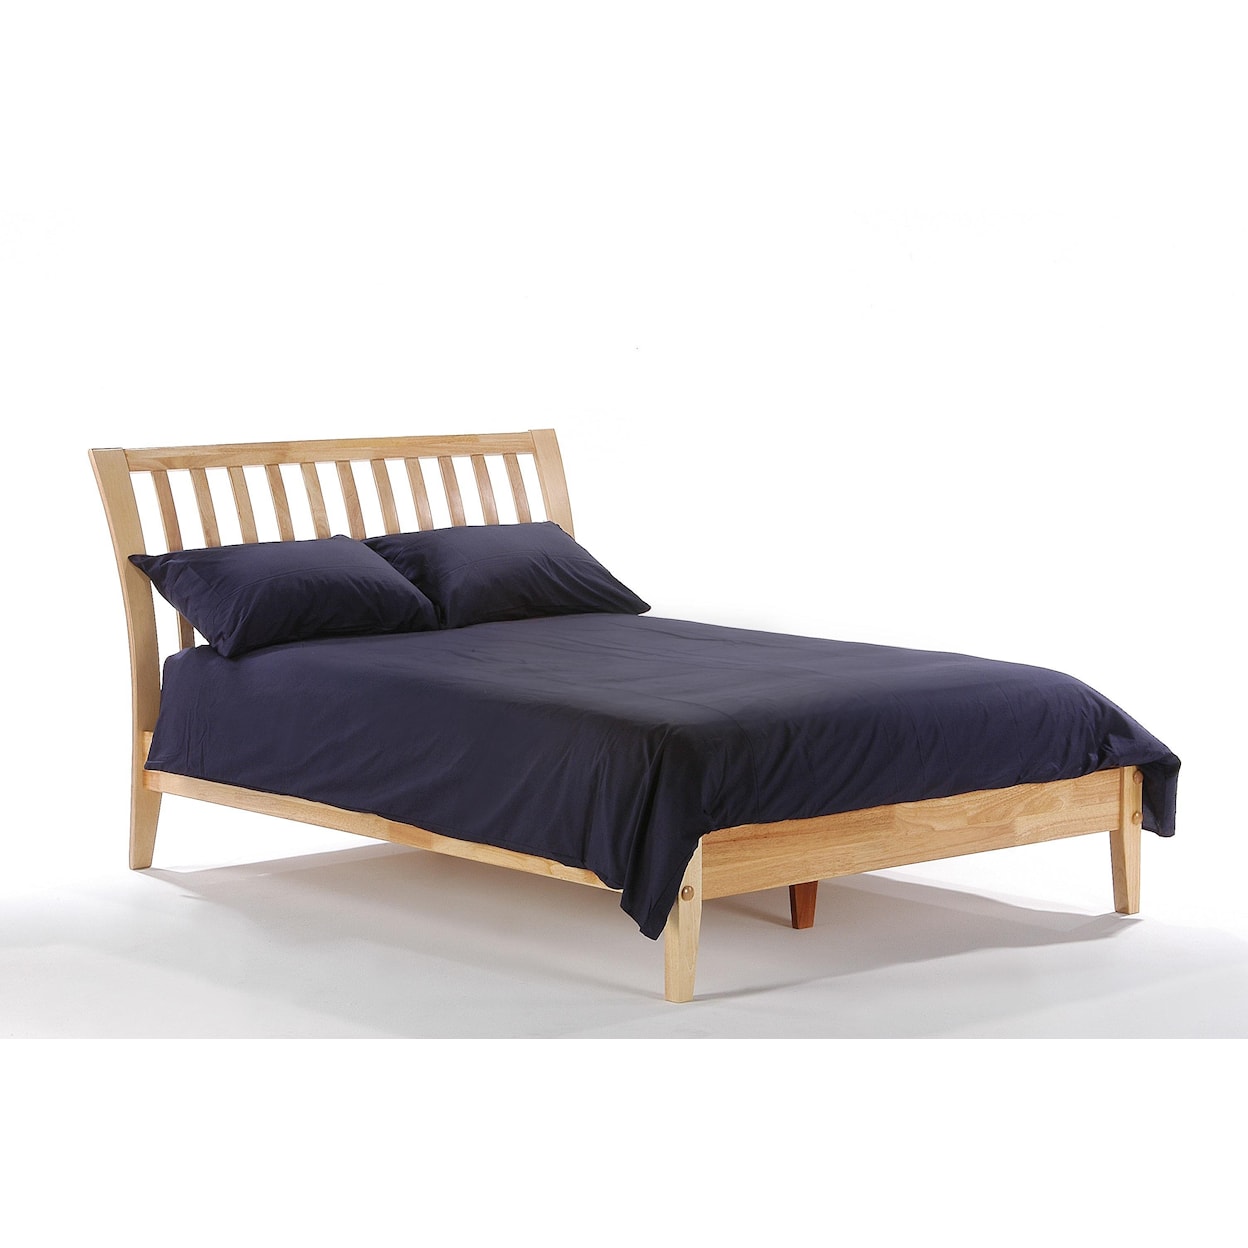 Pacific Manufacturing Nutmeg Queen Bed